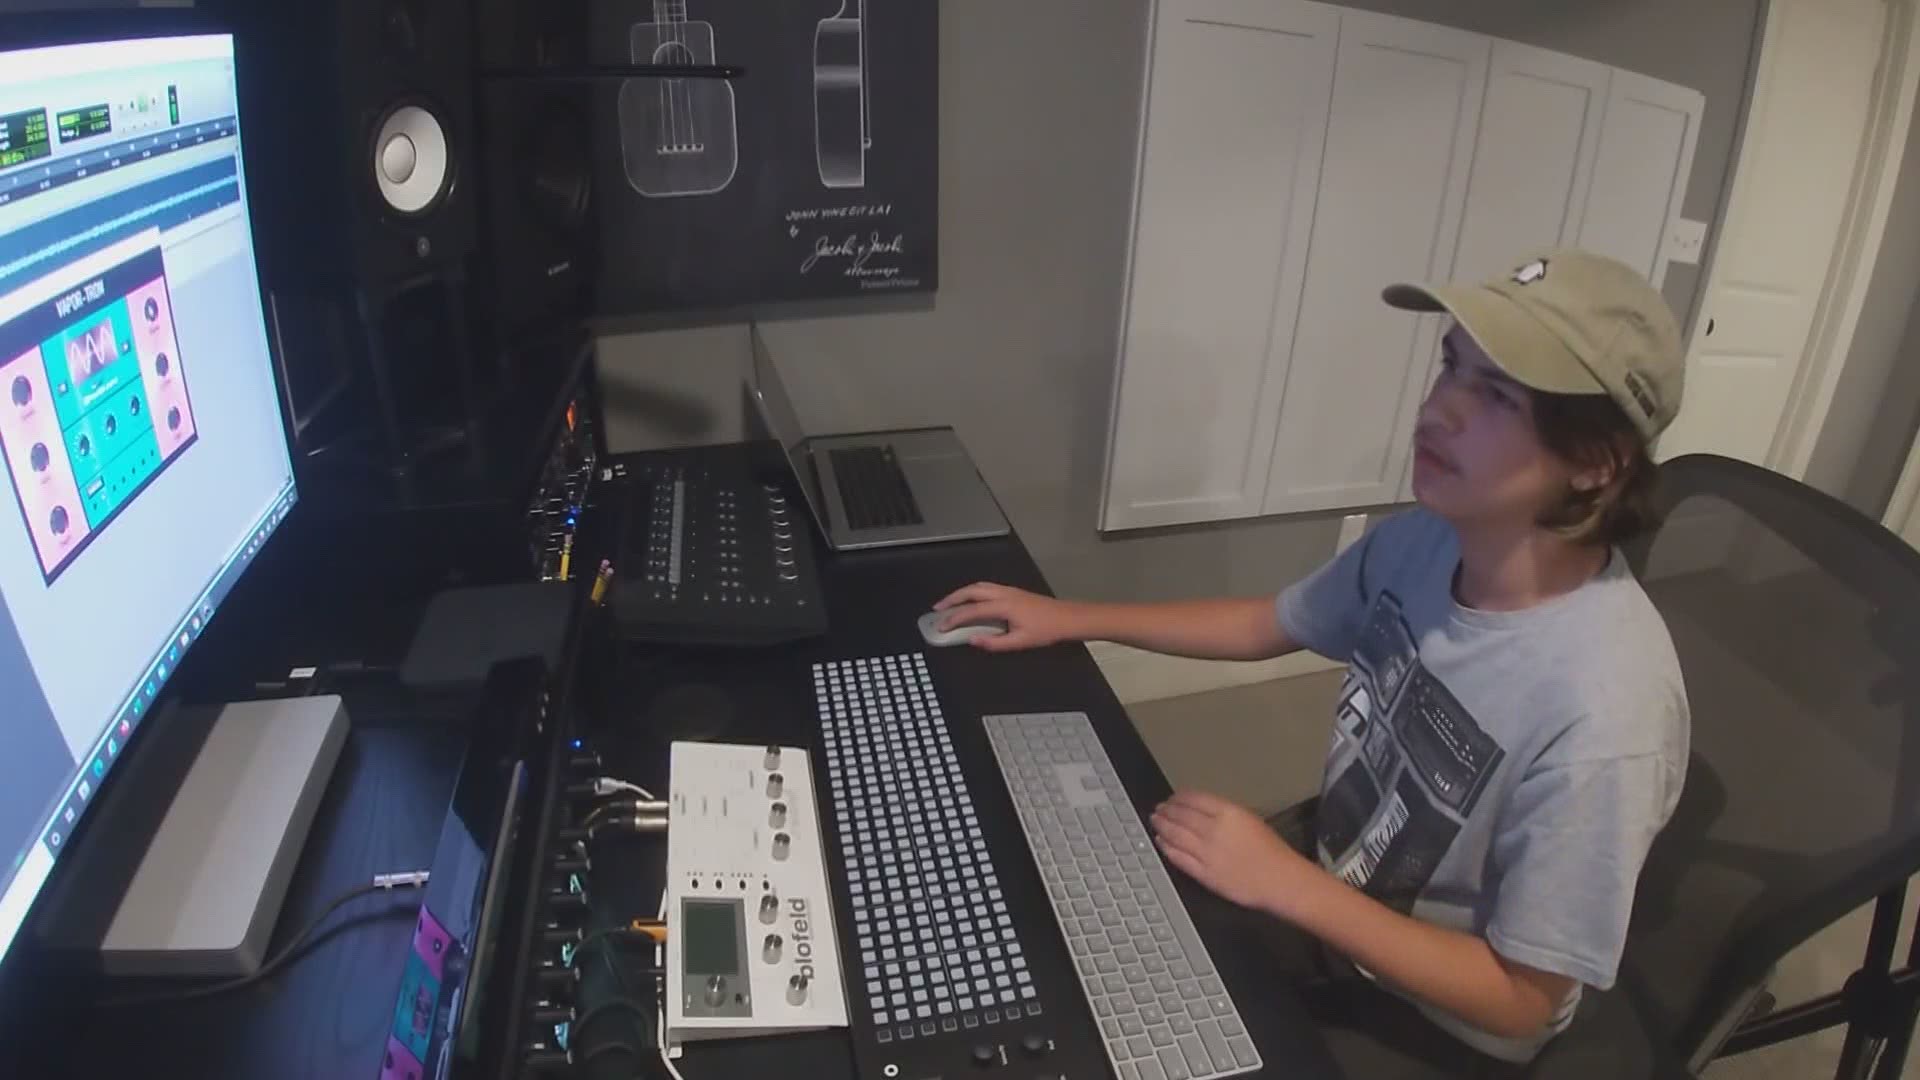 At just 14-years-old, Daniel Giulianti has launched his own audio company called TapeWrm Audio. Daniel creates audio plug-ins.